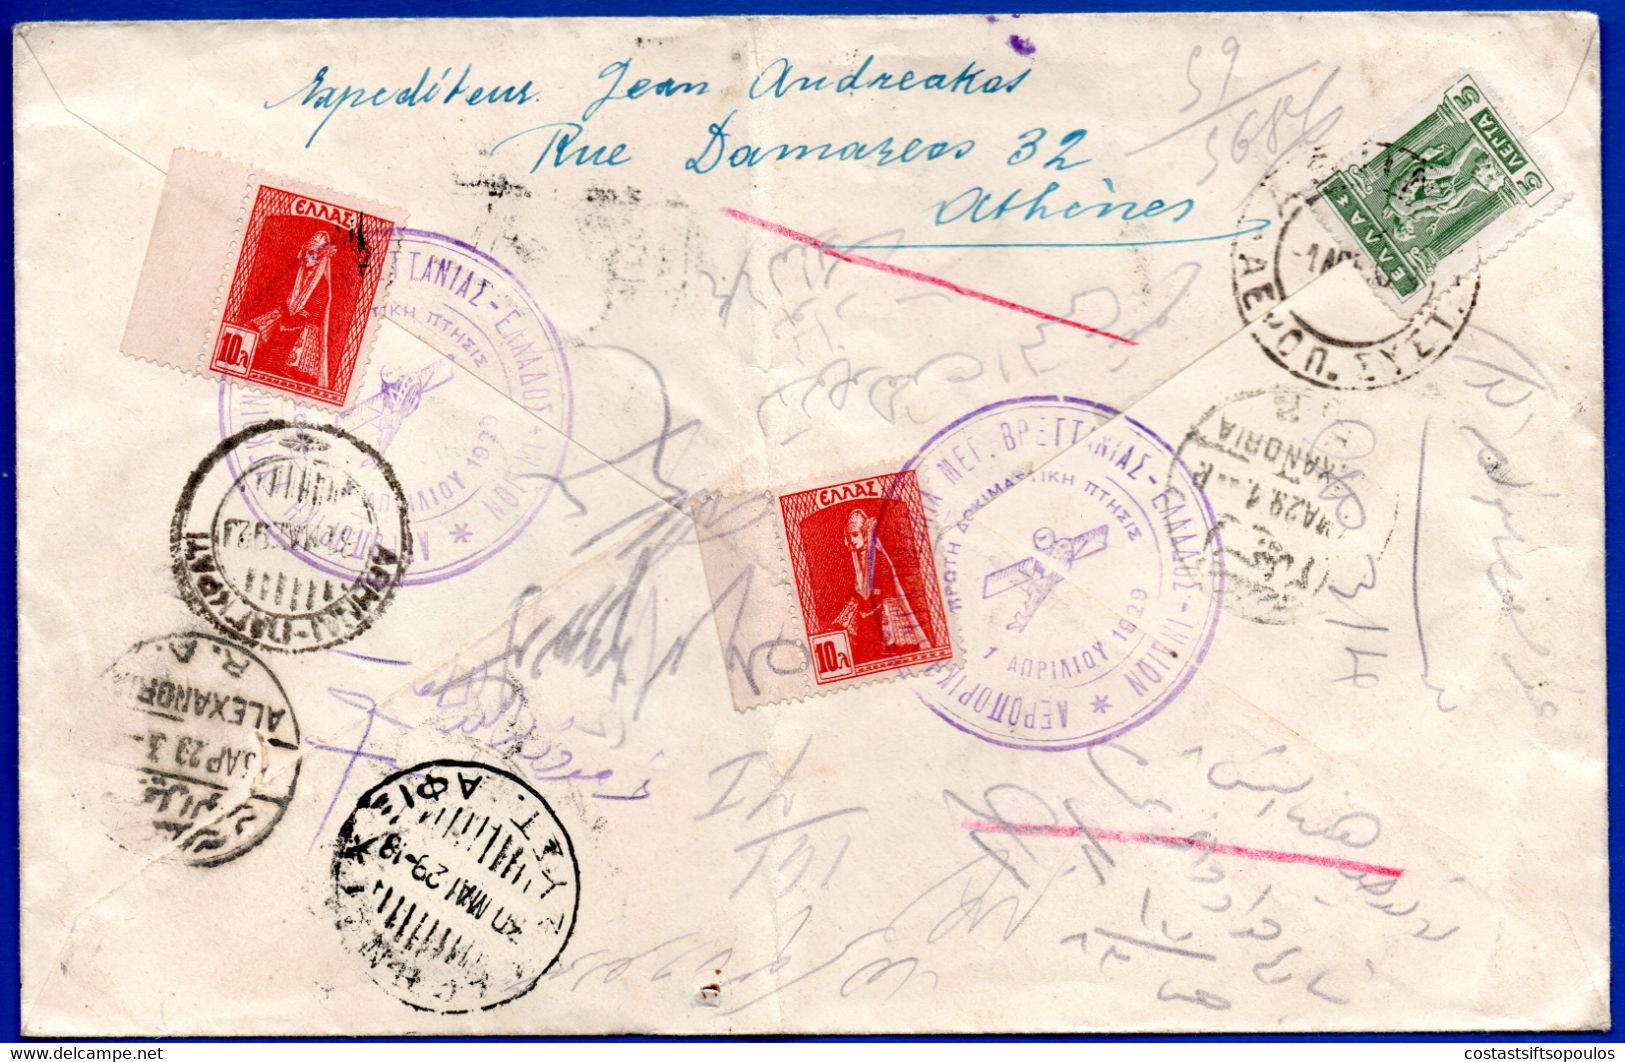 671.1929 ATHENS-ALEXANDRIA 1st. FLIGHT MULTIFRANKED RETURNED COVER.IMPERIAL AIRWAYS GB-GREECE-INDIA FOLDED VERTICALLY - Cartas & Documentos